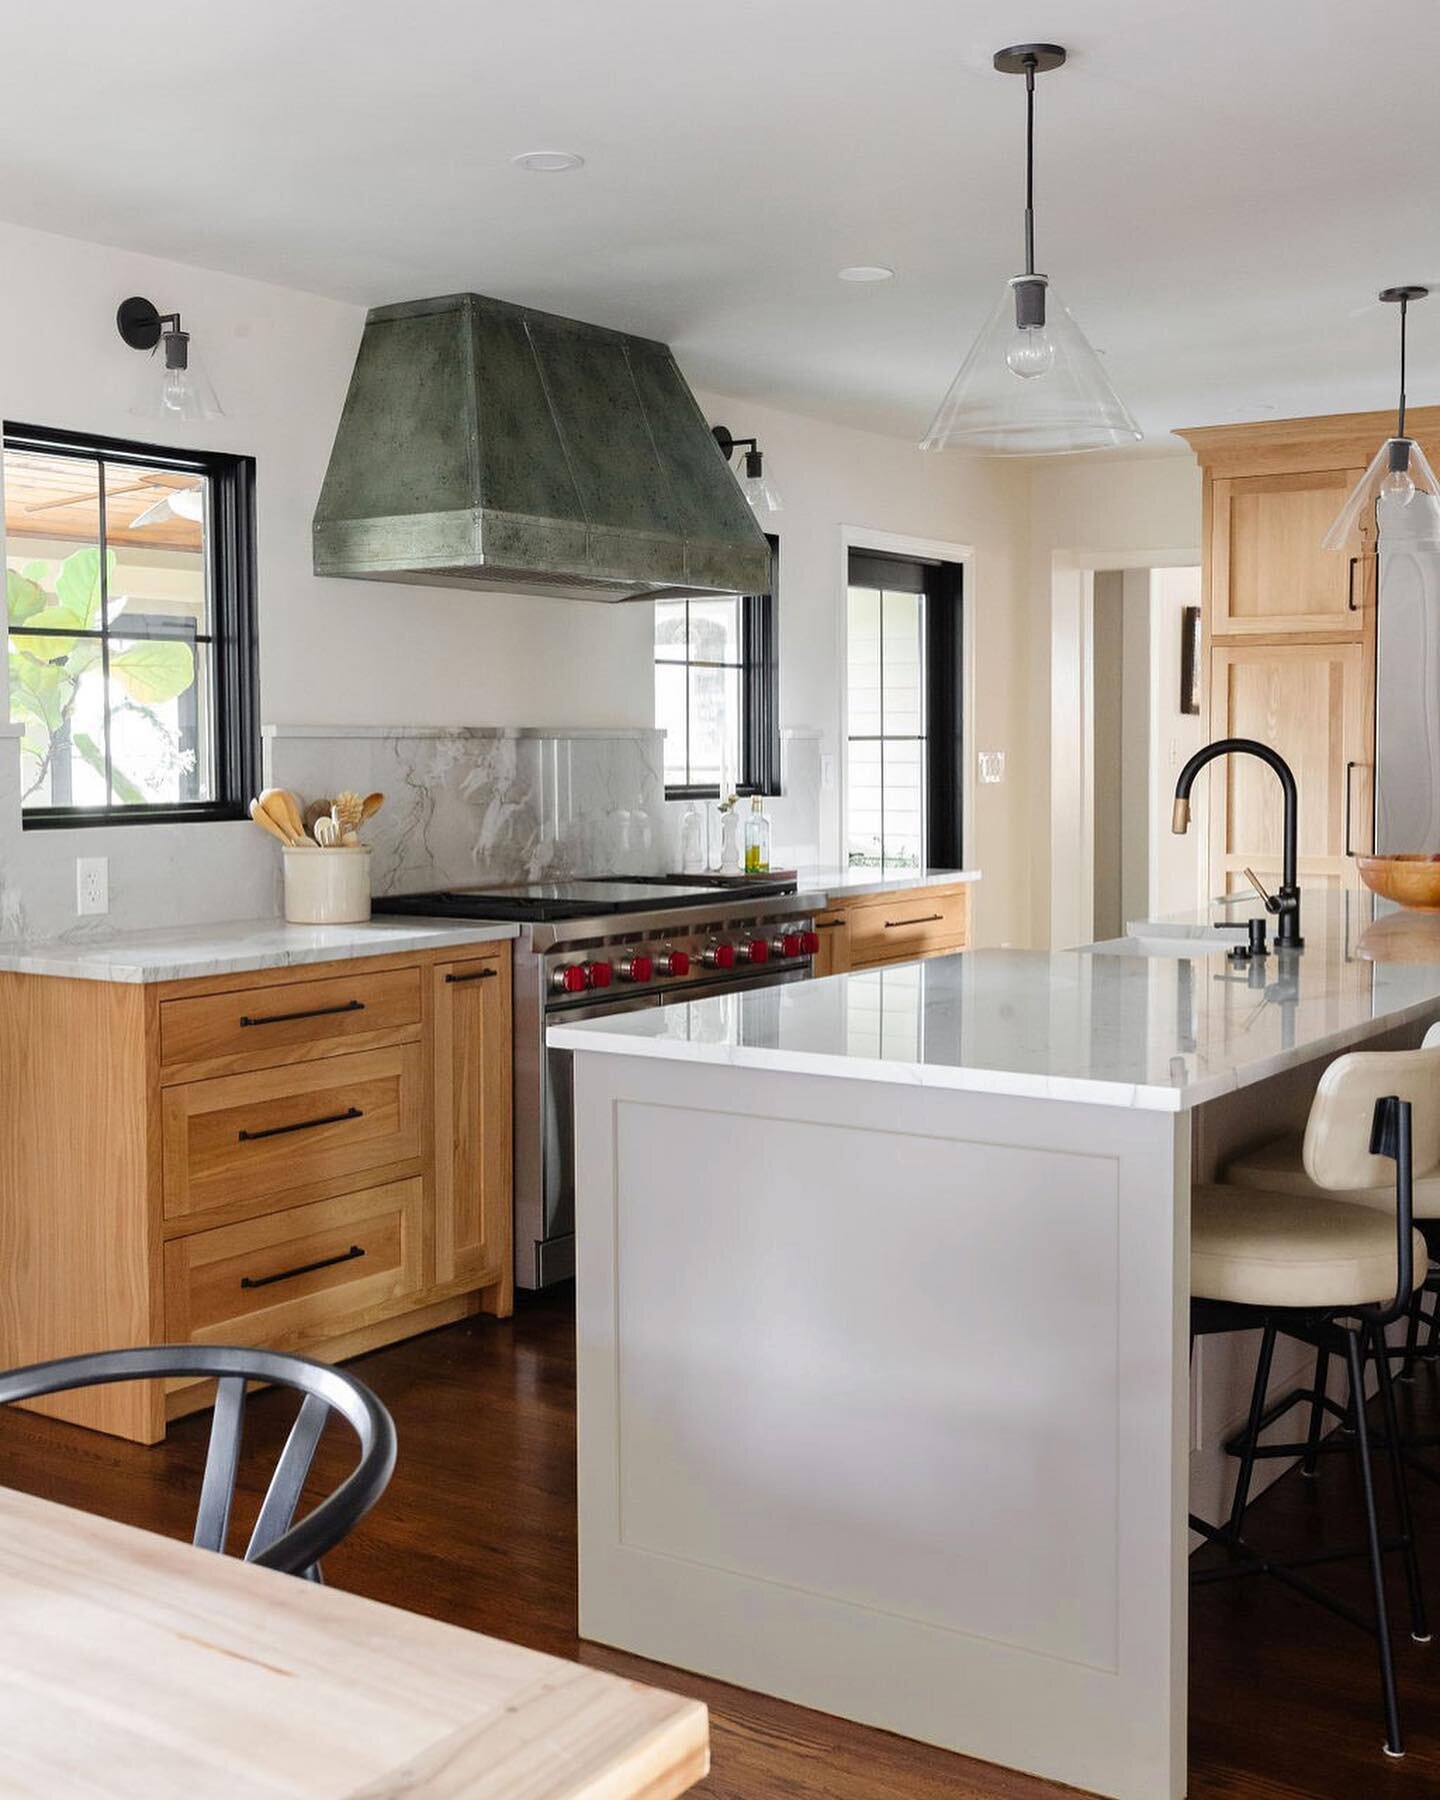 It&rsquo;s hard to imagine this space before the renovation.  Walls were removed, floors were raised, and now this family has a more functional kitchen.  Custom inset,
white oak cabinetry line the perimeter and a generous island fills the center of t